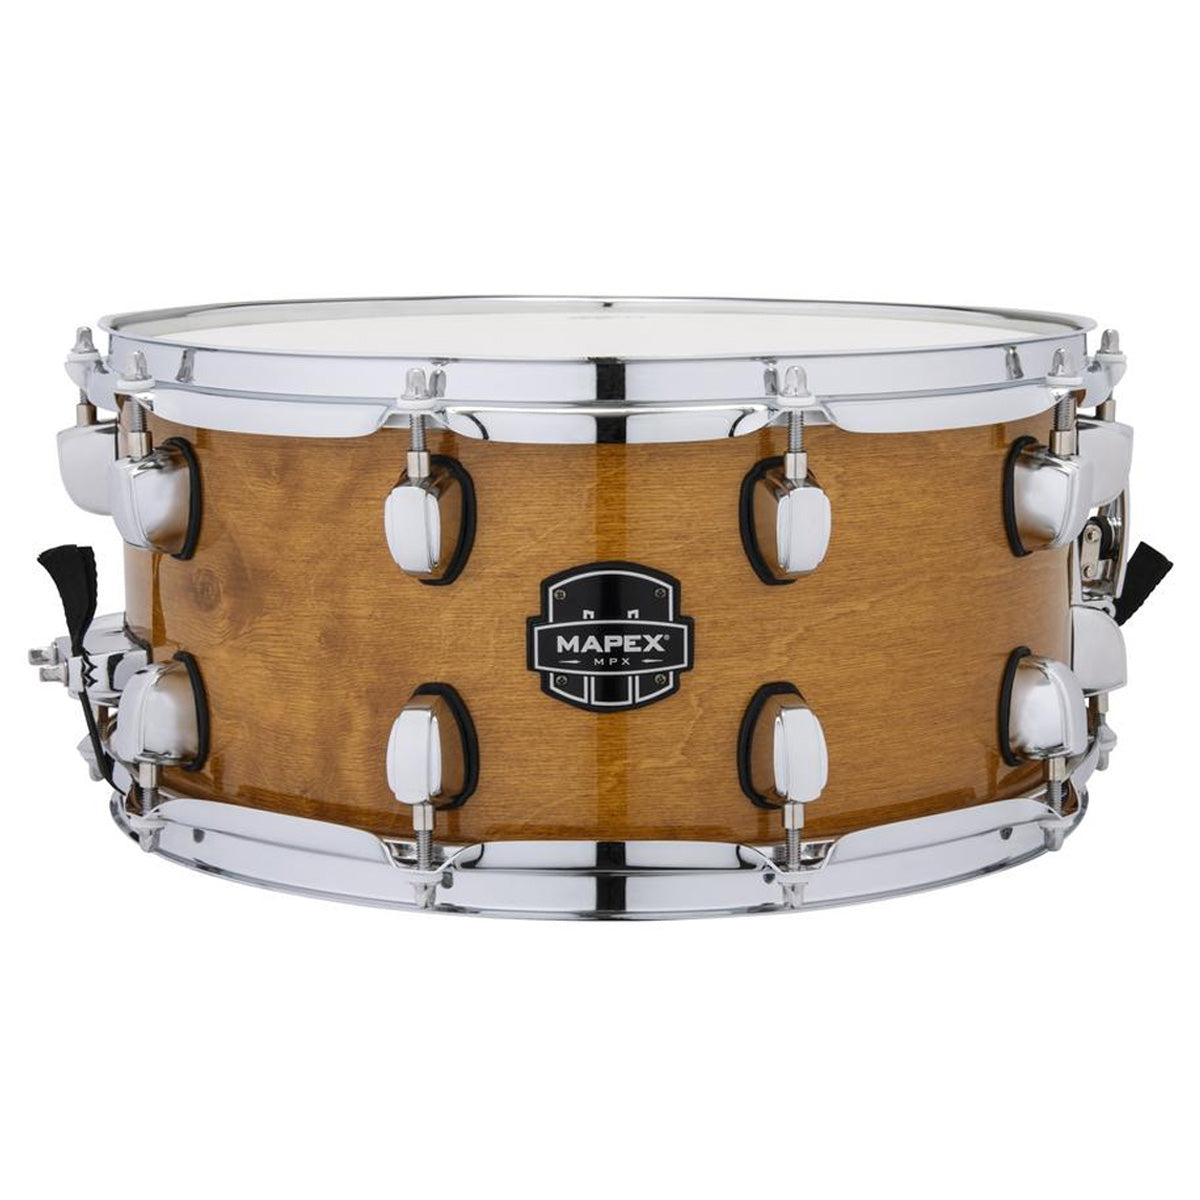 Mapex MPX 14"x6.5" Hybrid Shell Snare Drum in Natural